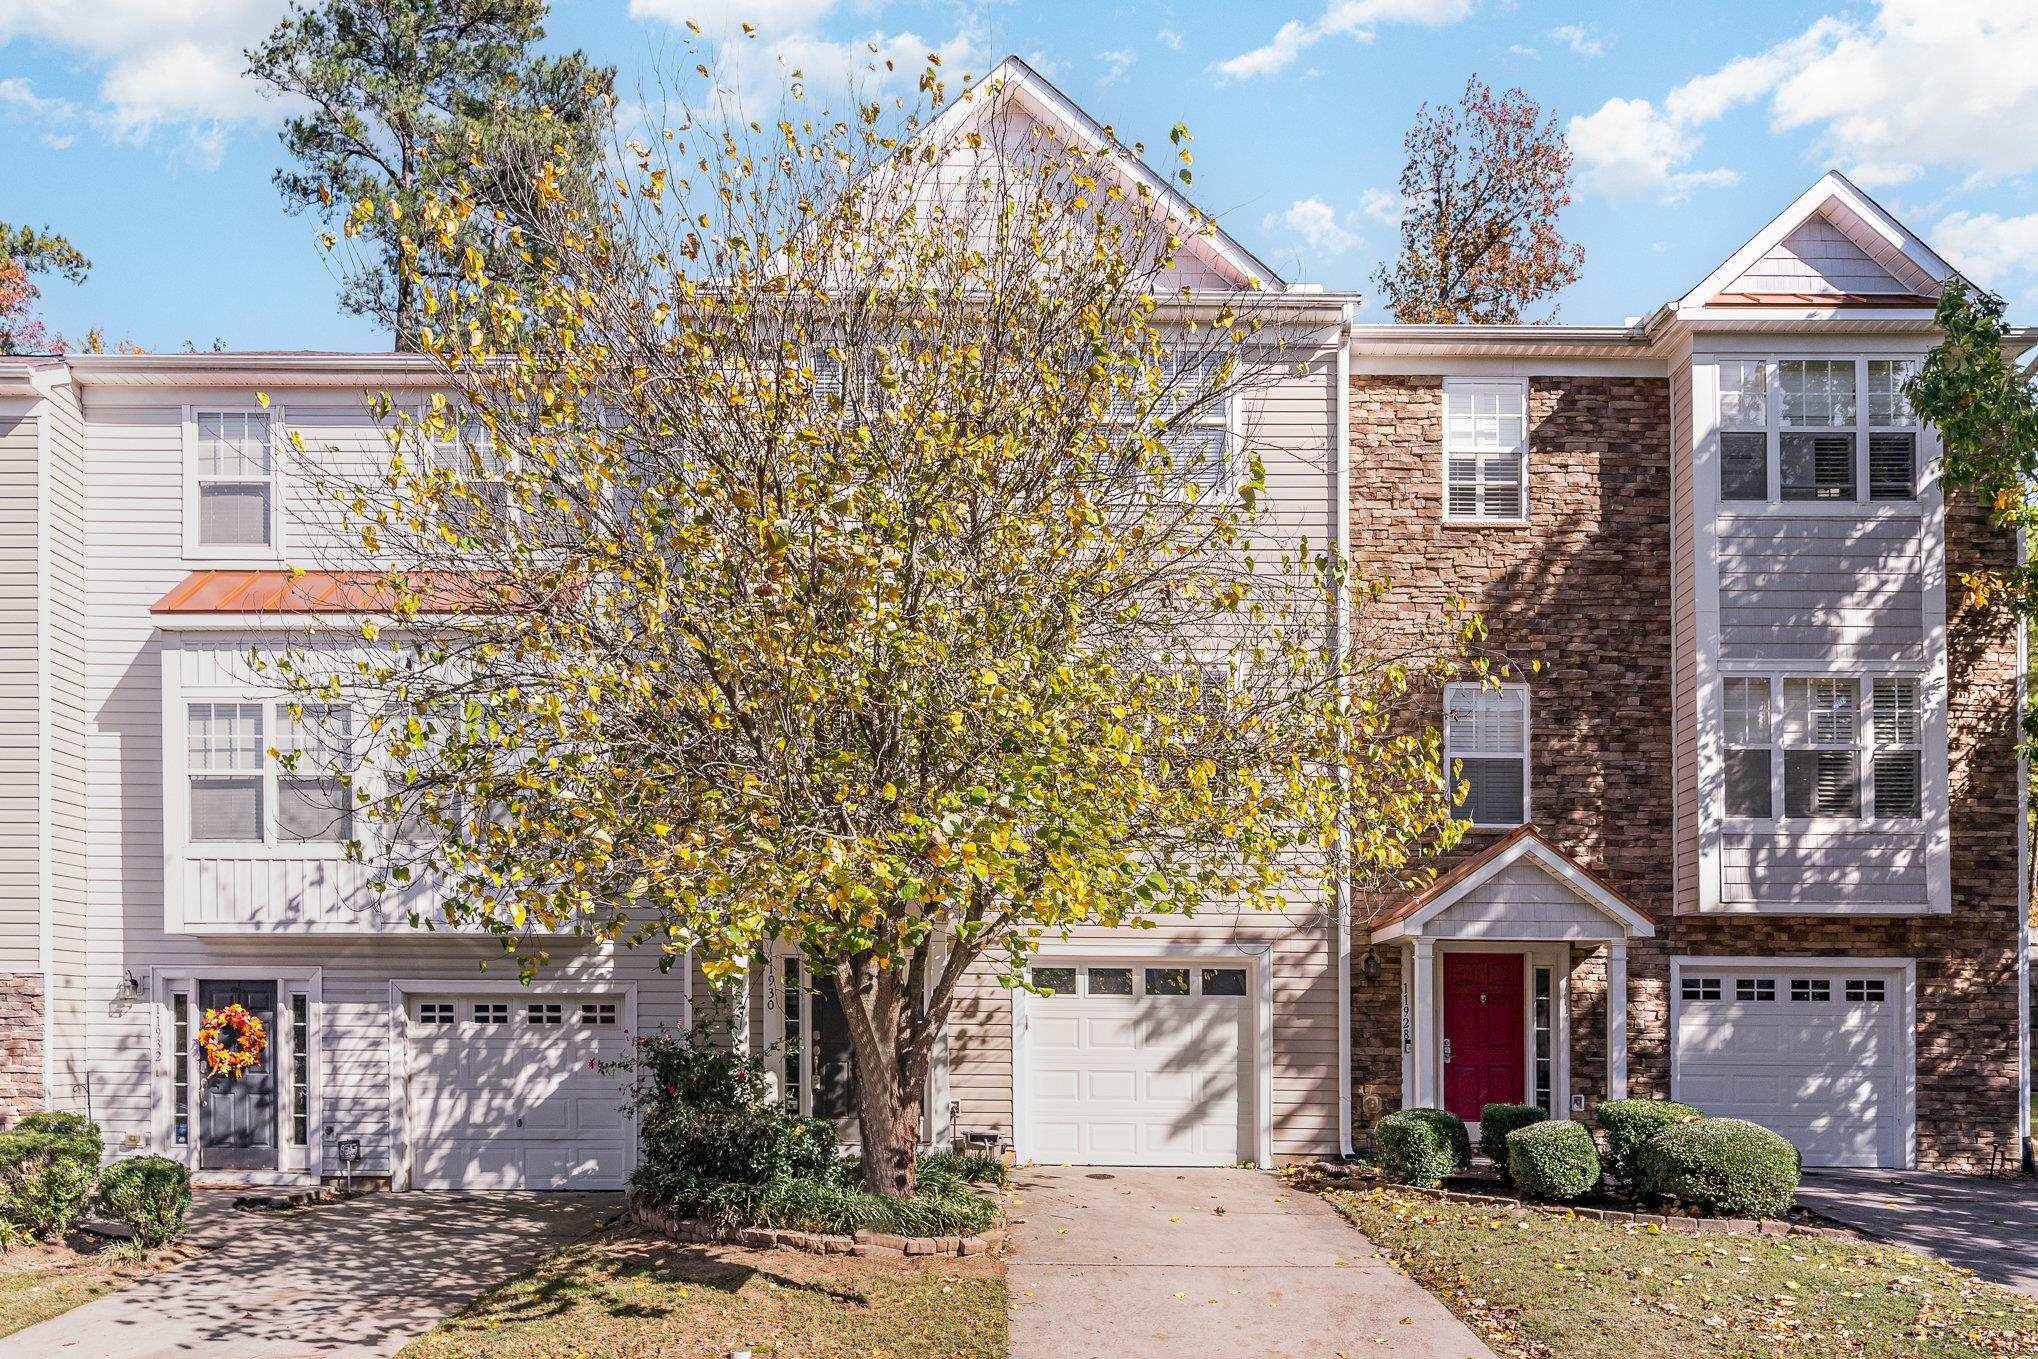 Photo one of 11930 Field Towne Ln Raleigh NC 27614 | MLS 2540347